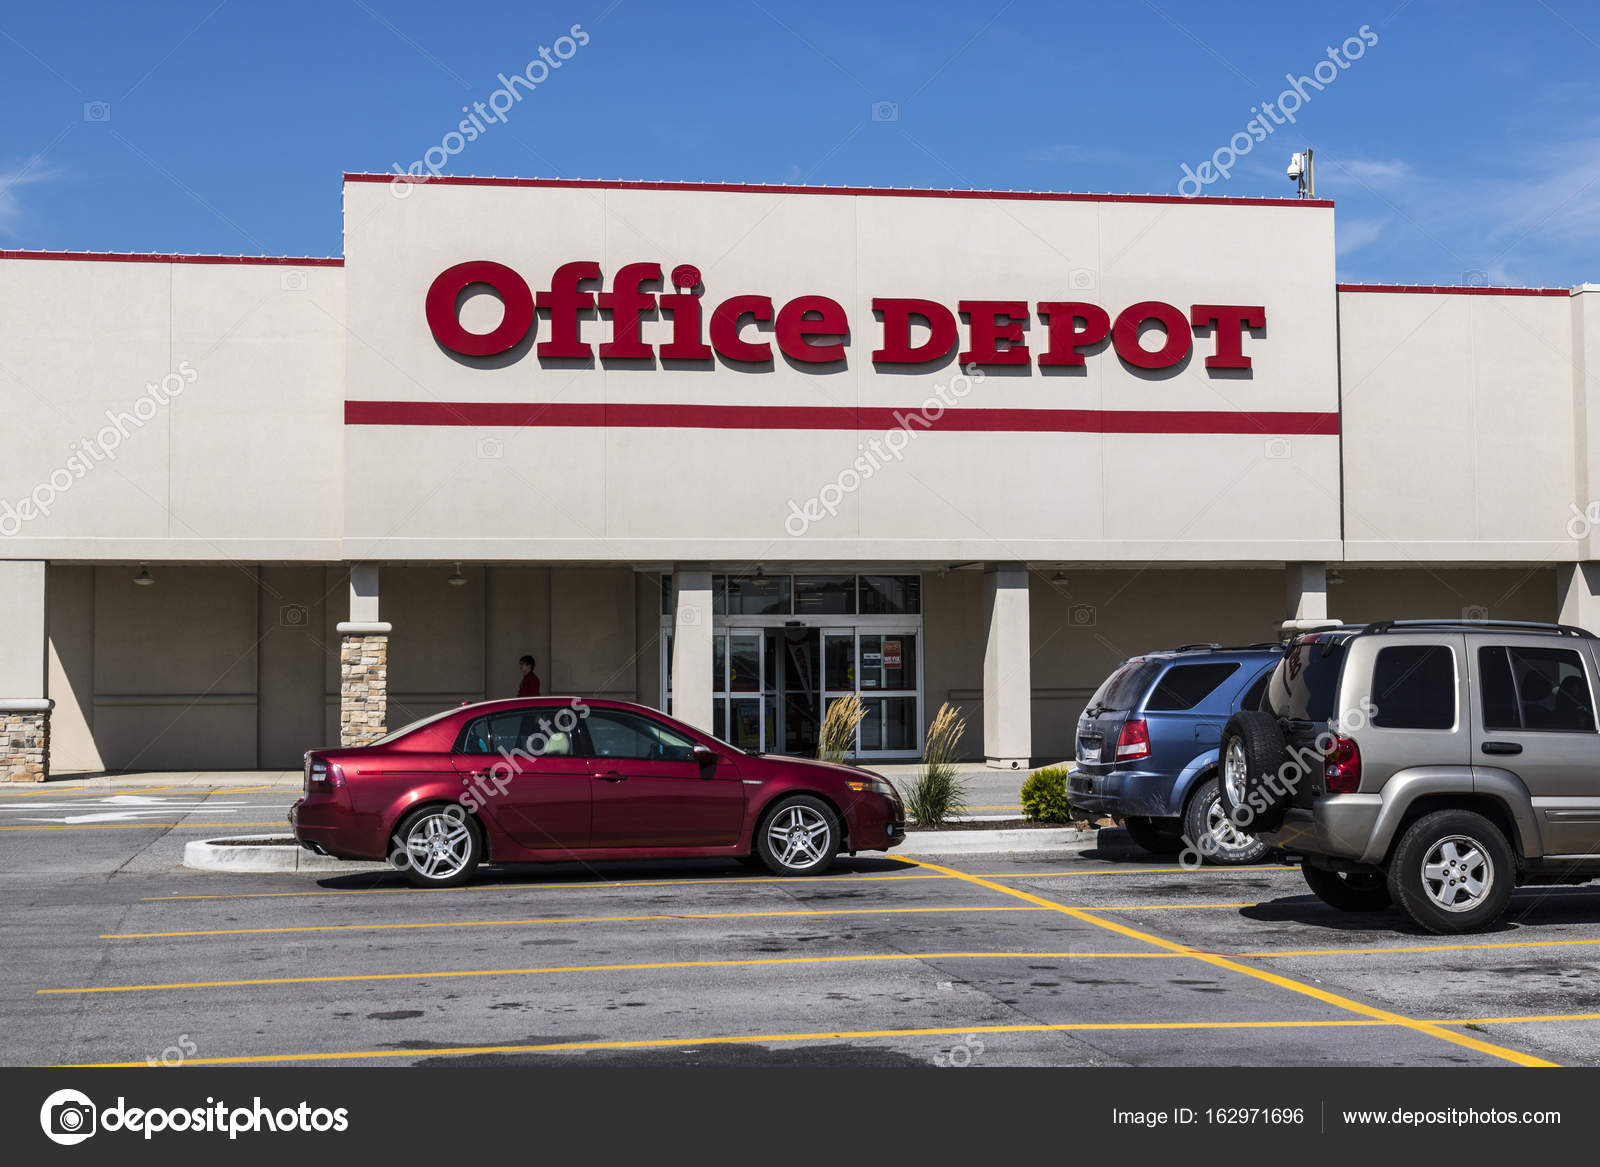 19 Officemax Stock Photos Free Royalty Free Officemax Images Depositphotos